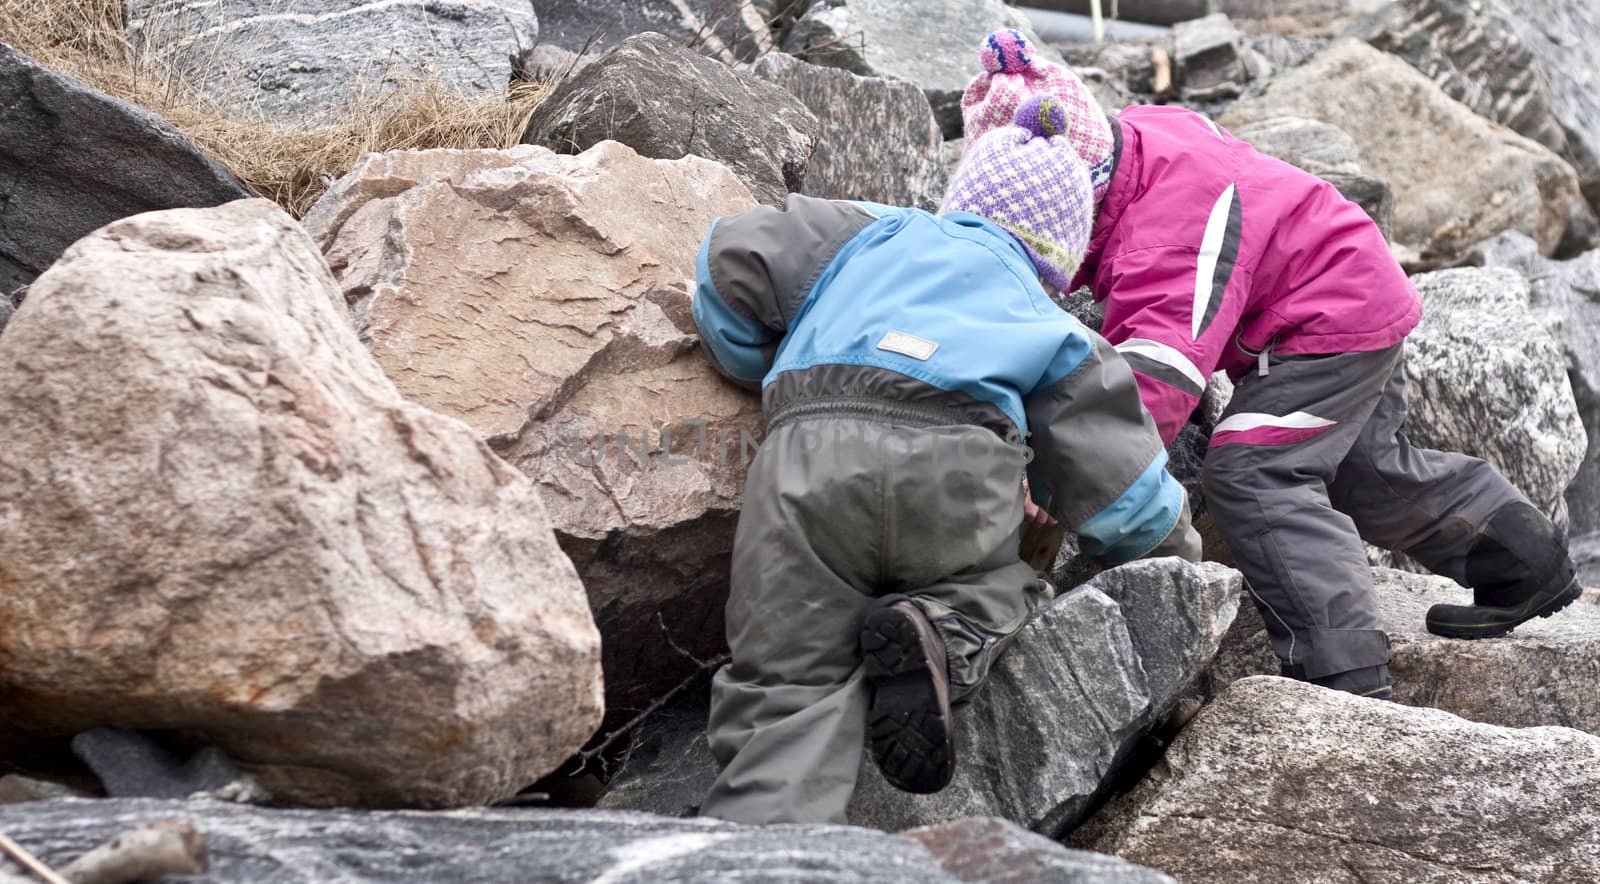 Children searching for treasures between large rocks